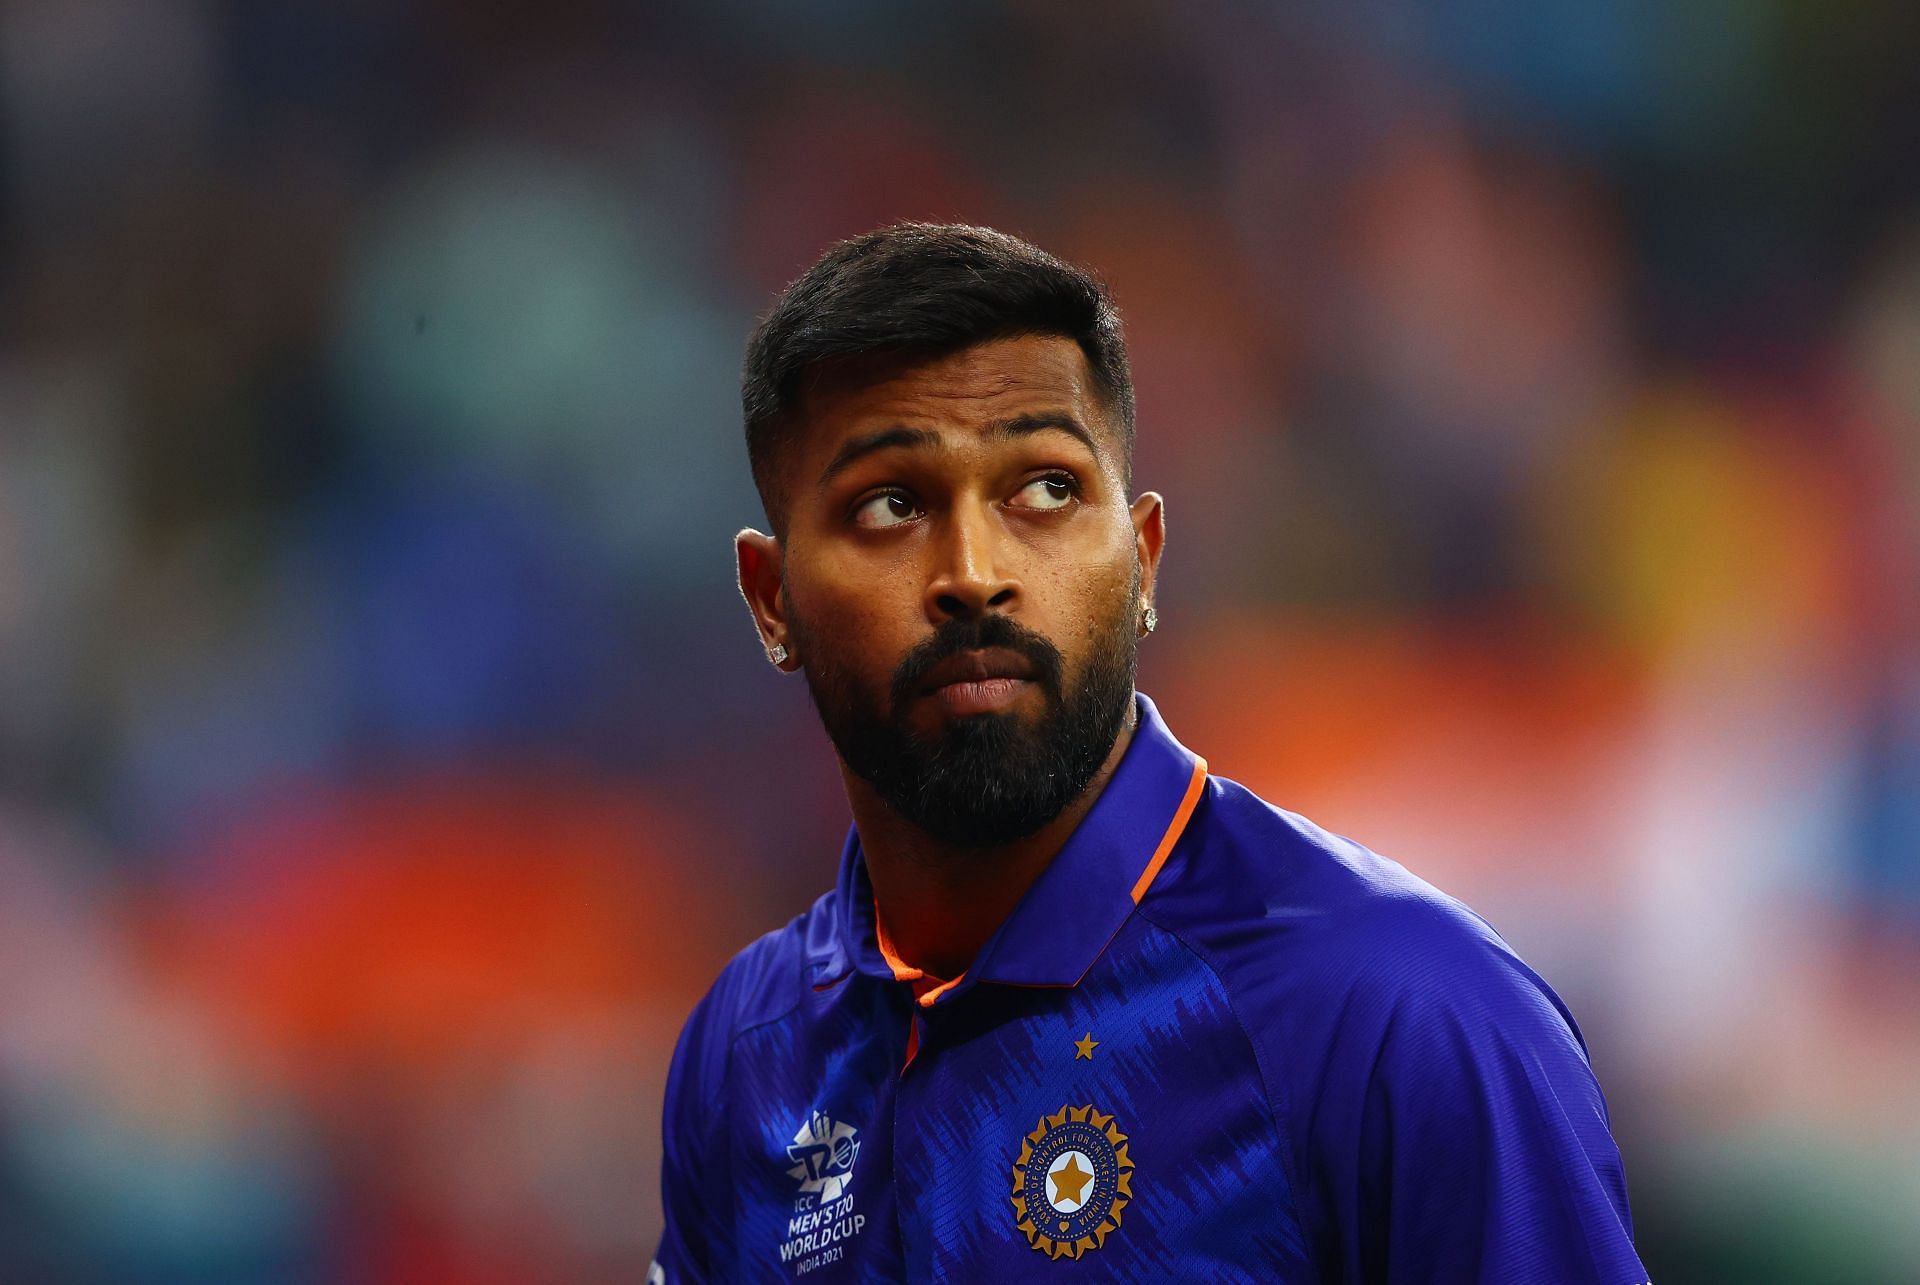 Hardik Pandya last featured for India in the ICC T20 World Cup in 2021 (Credit: Getty Images)